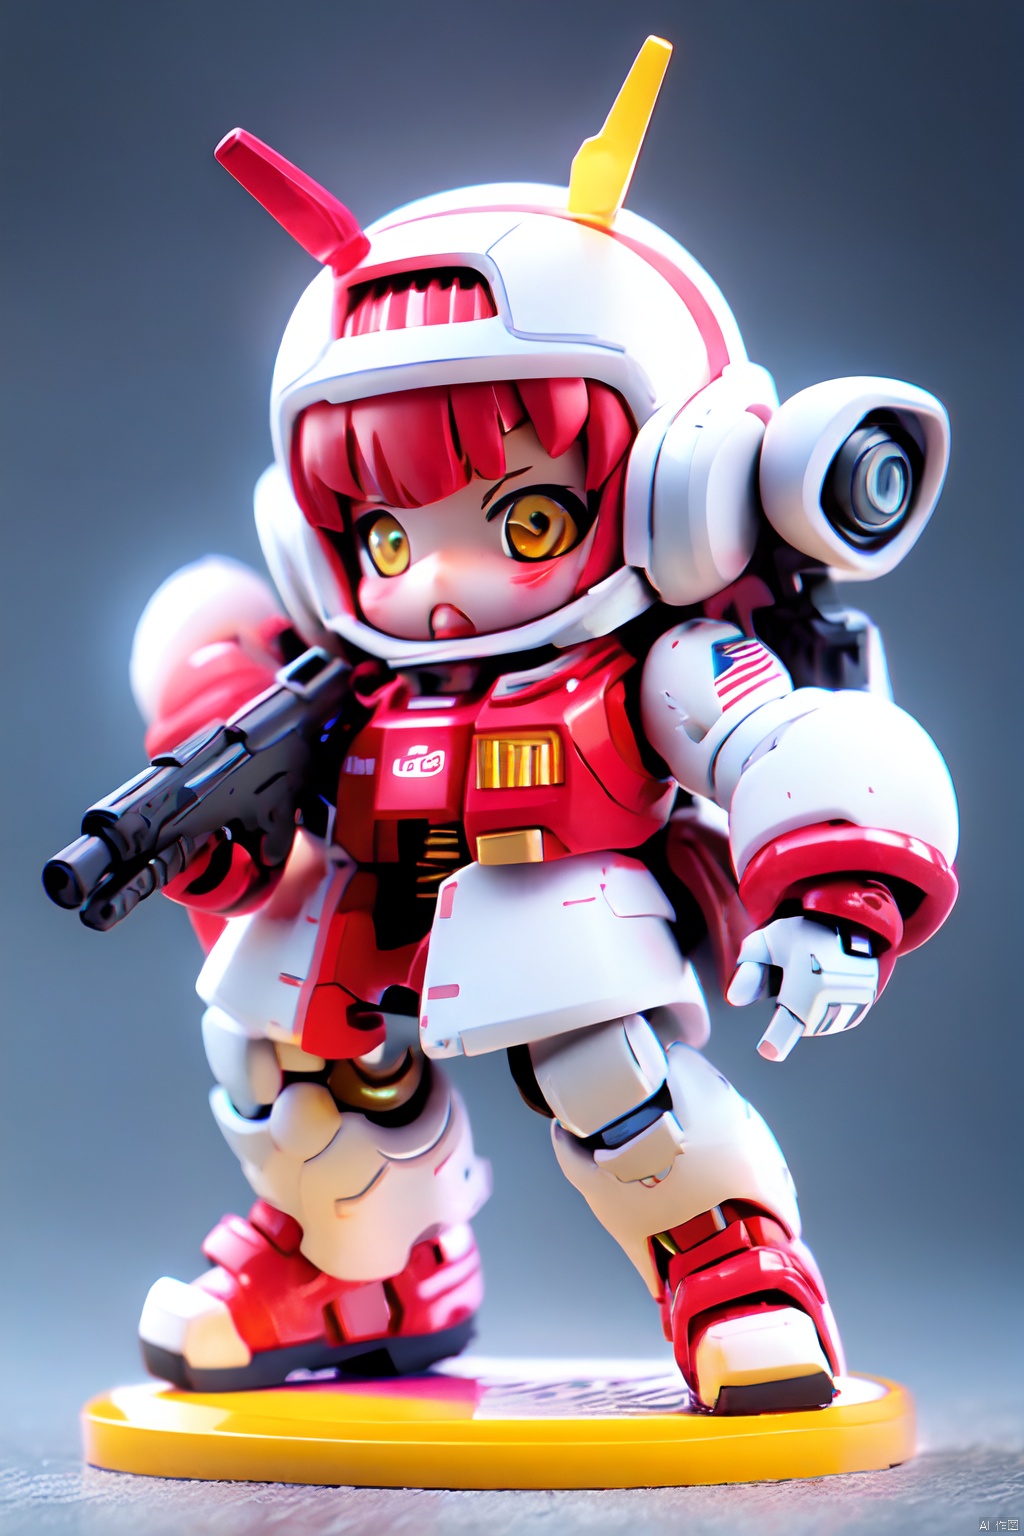  gdsj,robot,mecha,chibi,solo,no humans,weapon,v-fin,gun,holding,space,mobile suit,holding weapon,holding gun,beam rifle,clenched hand,science fiction,glowing,energy gun,glowingeyes,, ( figma:0.8)